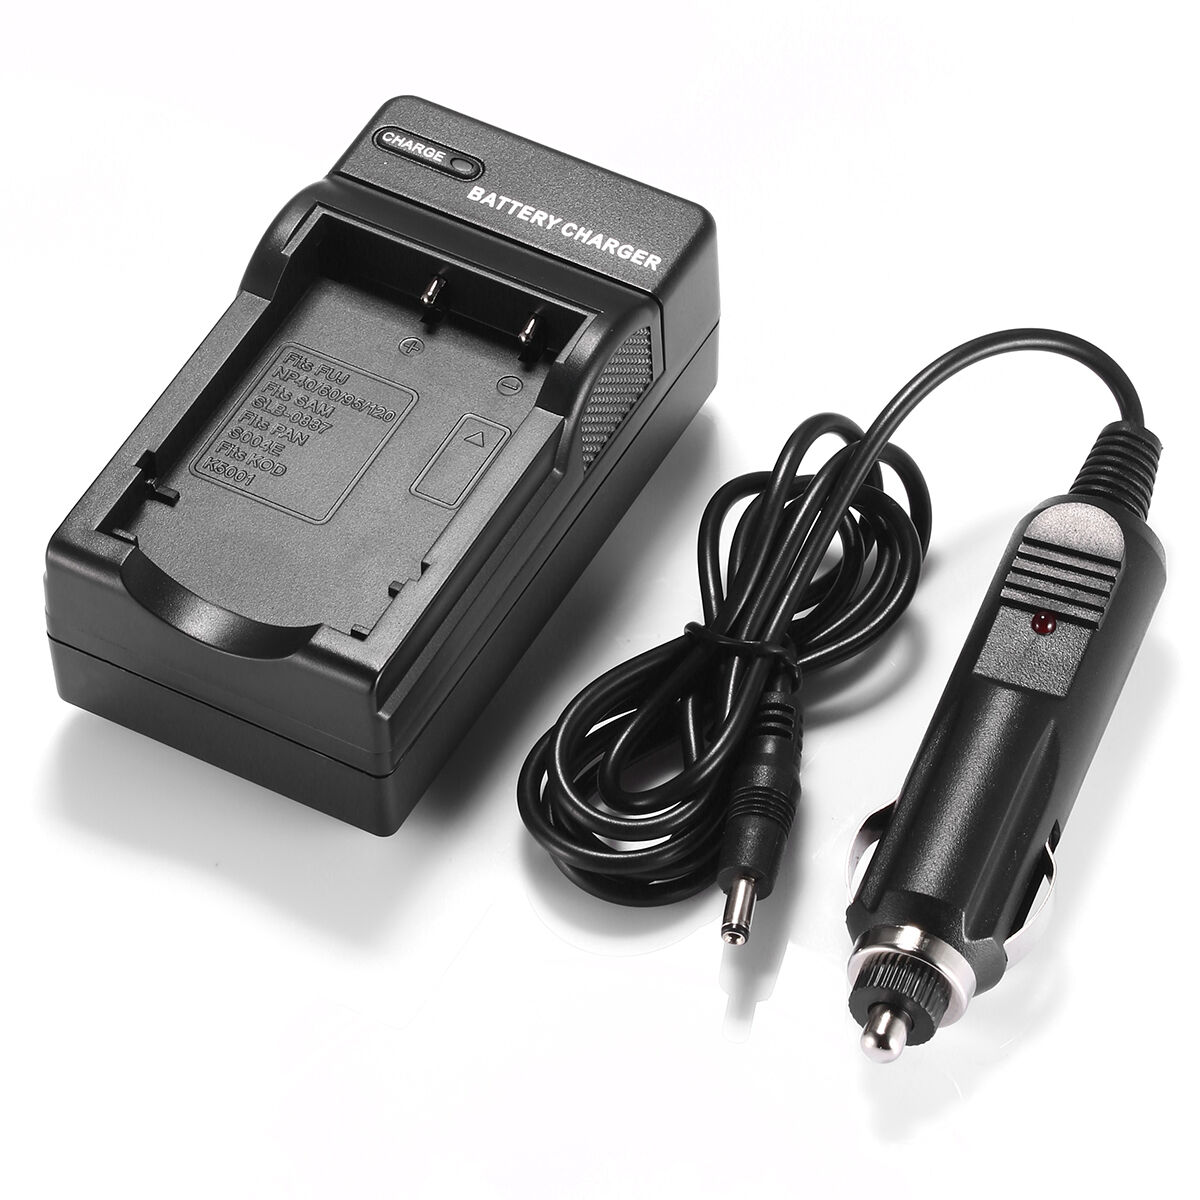 CASIO Exilim EX-H10 battery charger